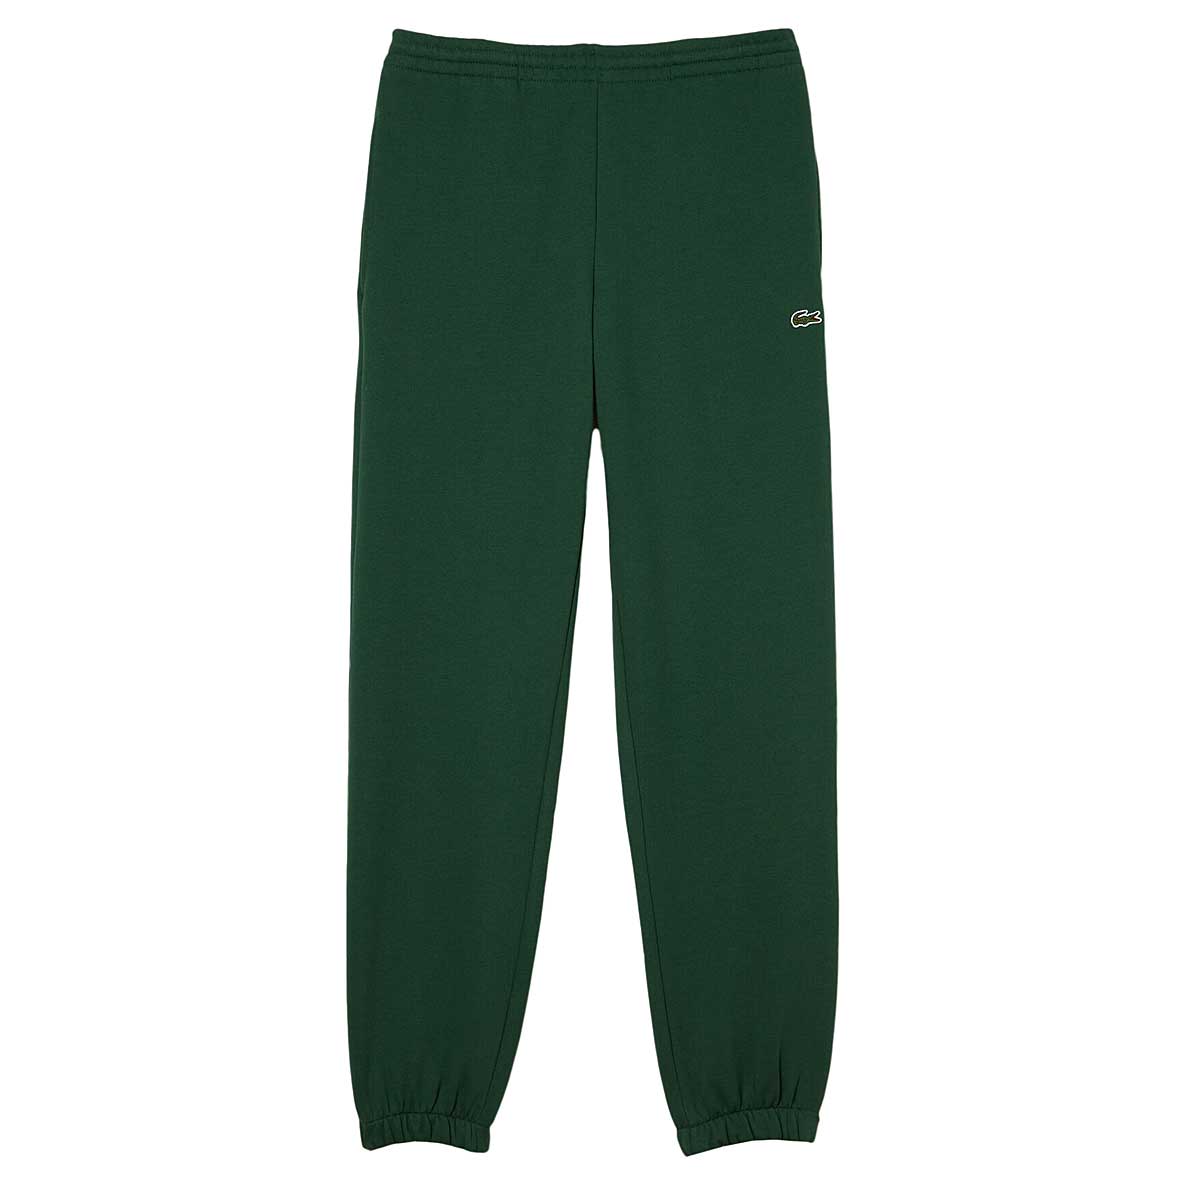 Image of Lacoste Sweat Pant, Green